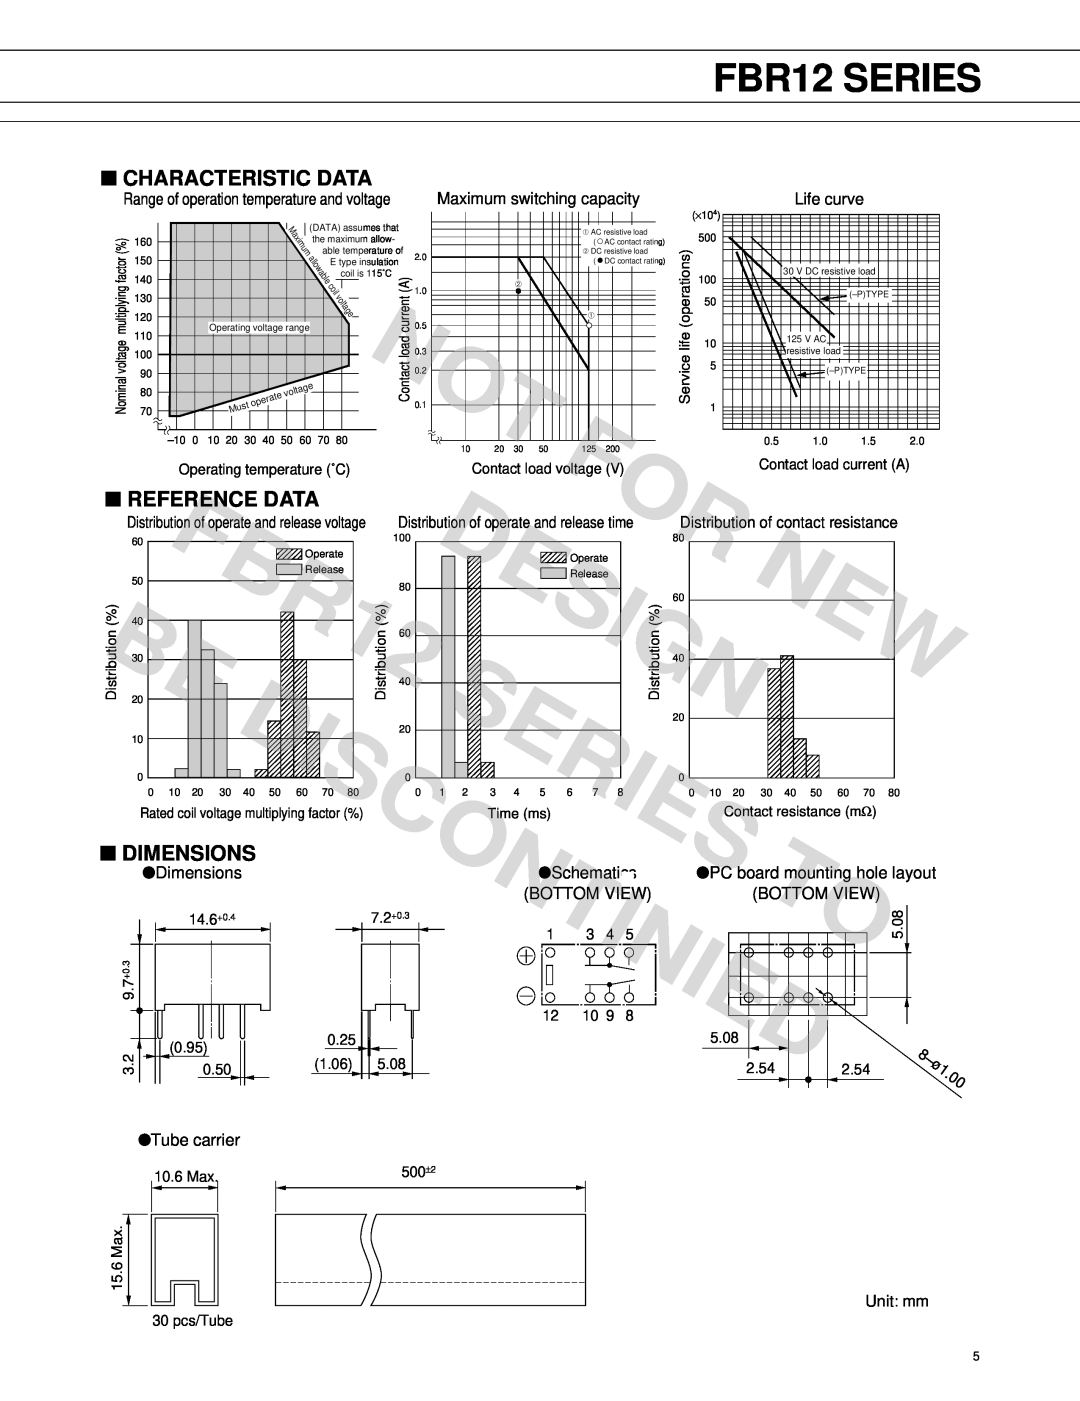 Fujitsu manual Characteristic Data, Reference Data, Dimensions, Series, Discontinied, Design, FBR12 SERIES 